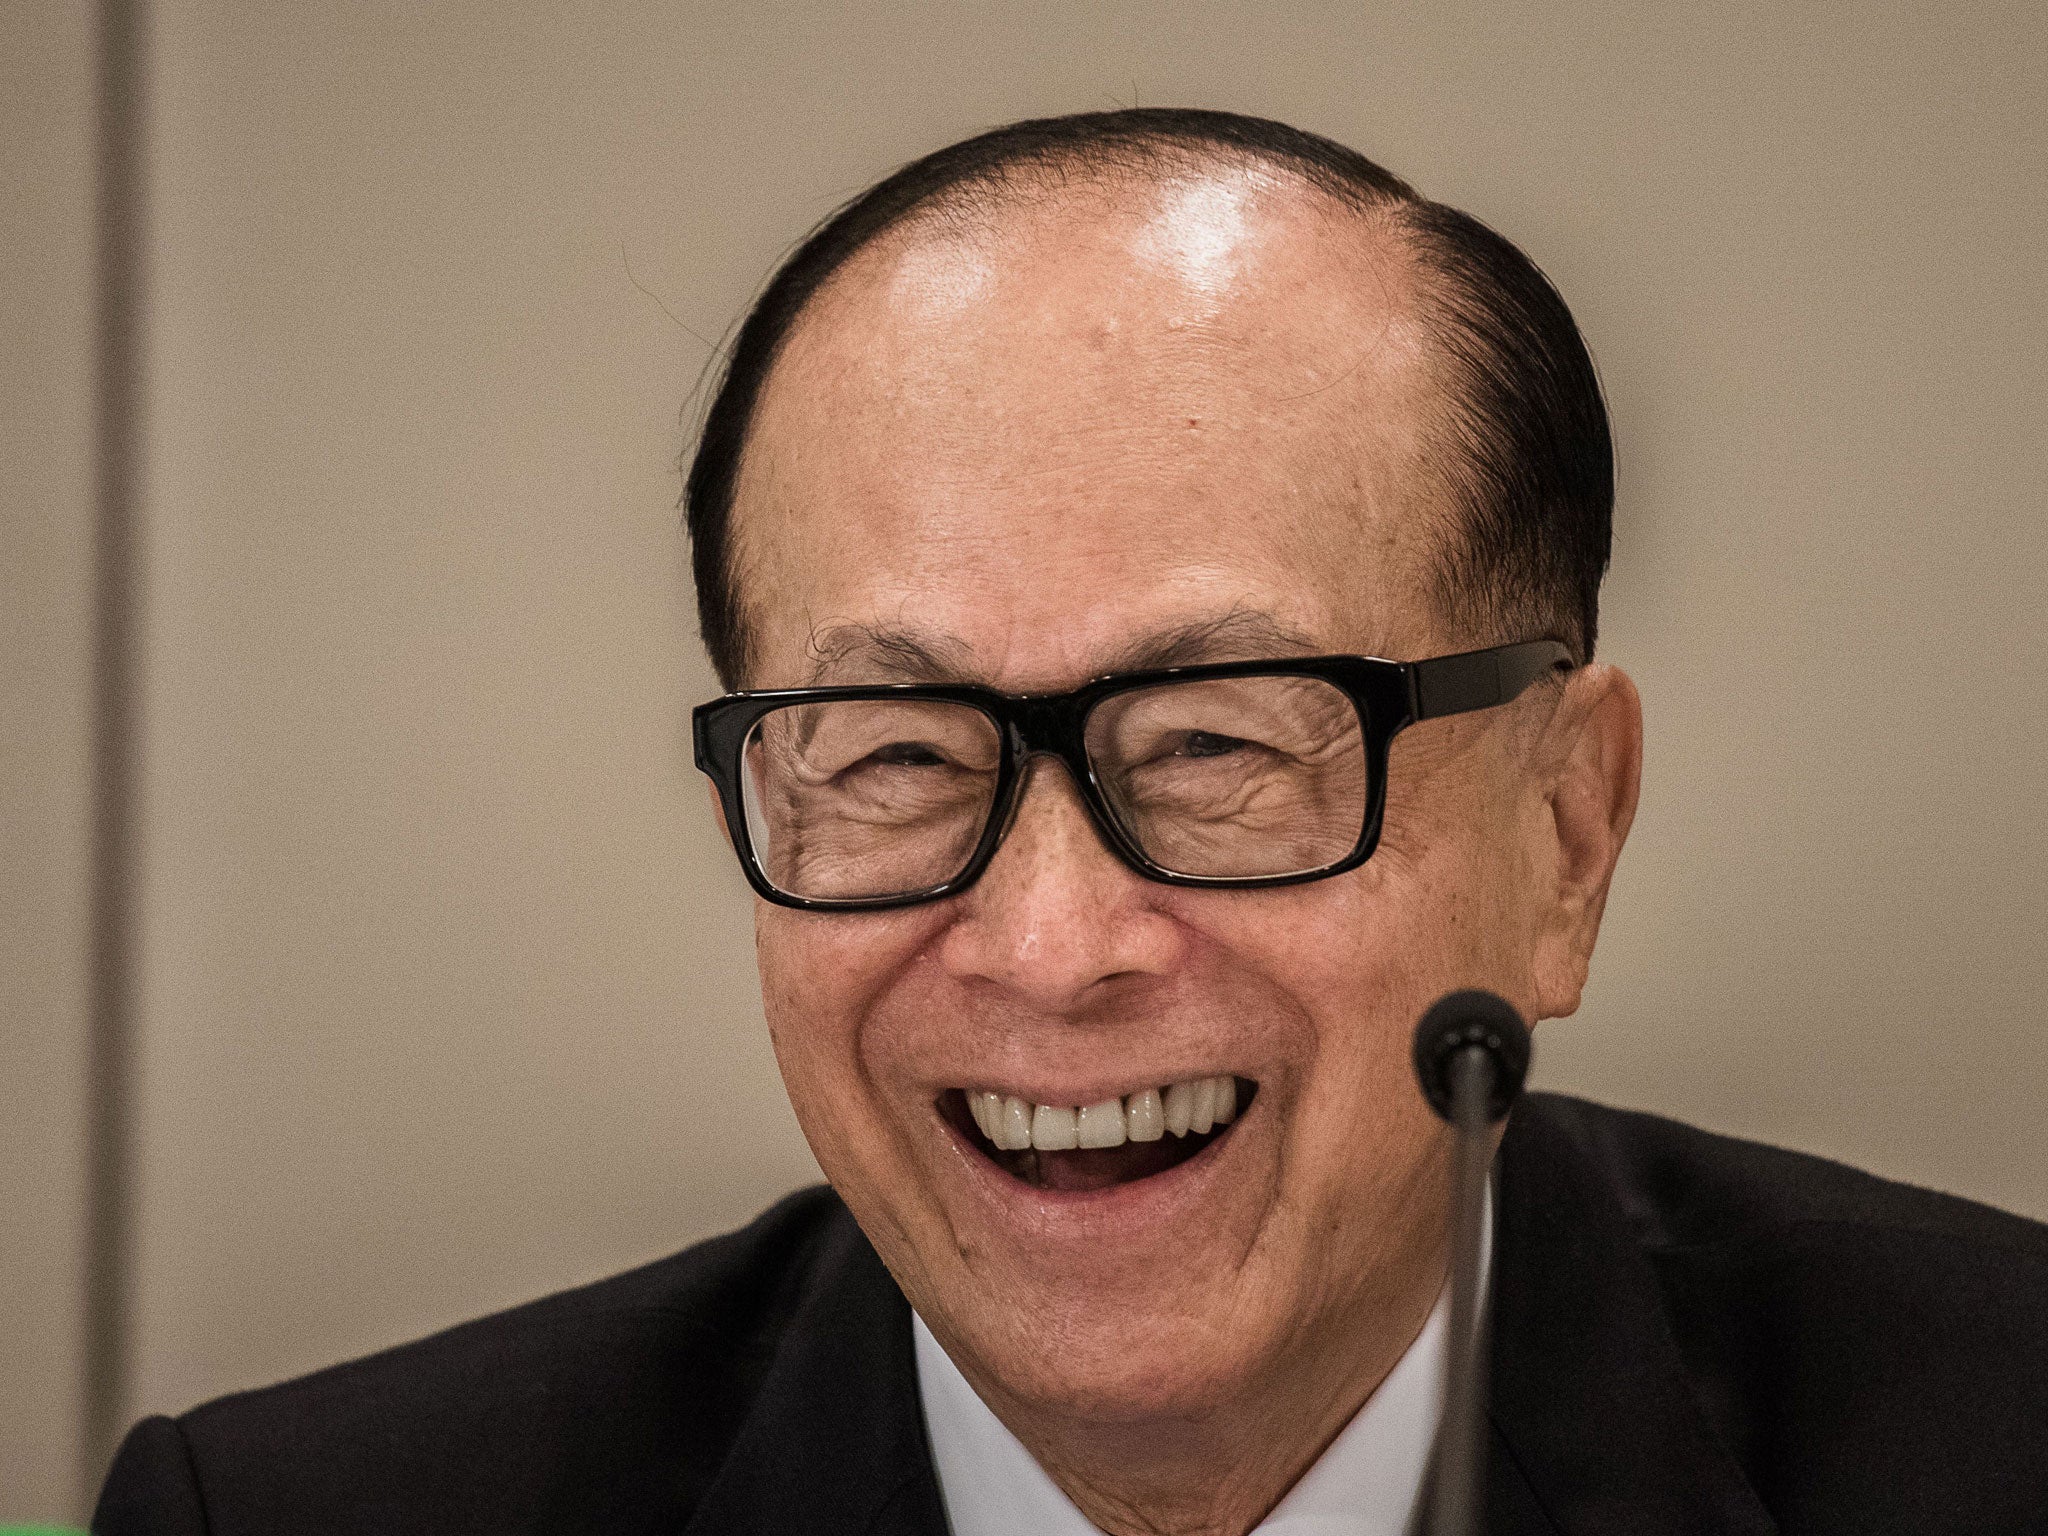 The Hong Kong billionaire is the chairman of Hutchison Whampoa